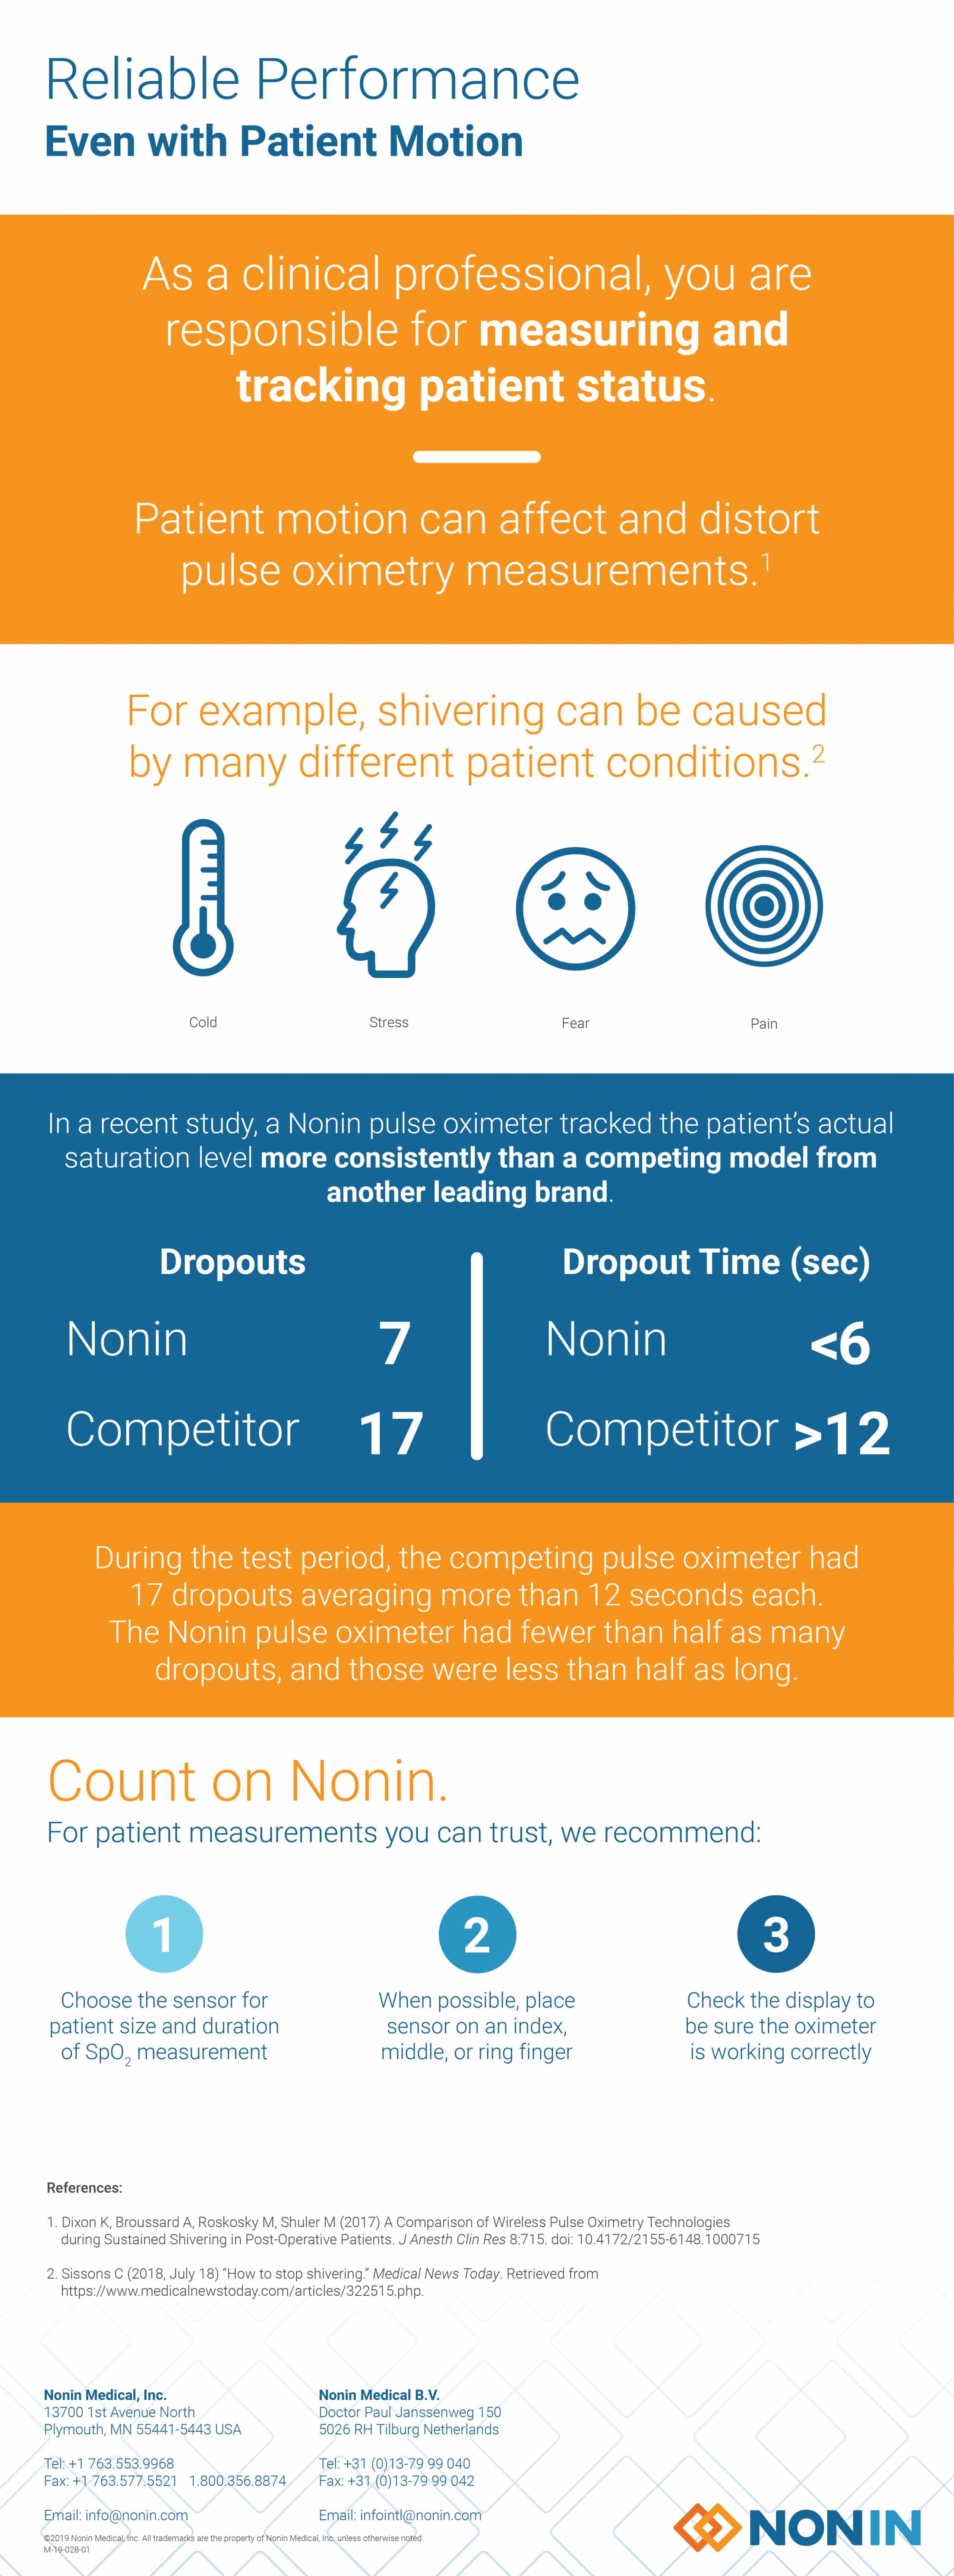 Shiver Infographic, patient motion, nonin, competitor, dropout time, count on nonin